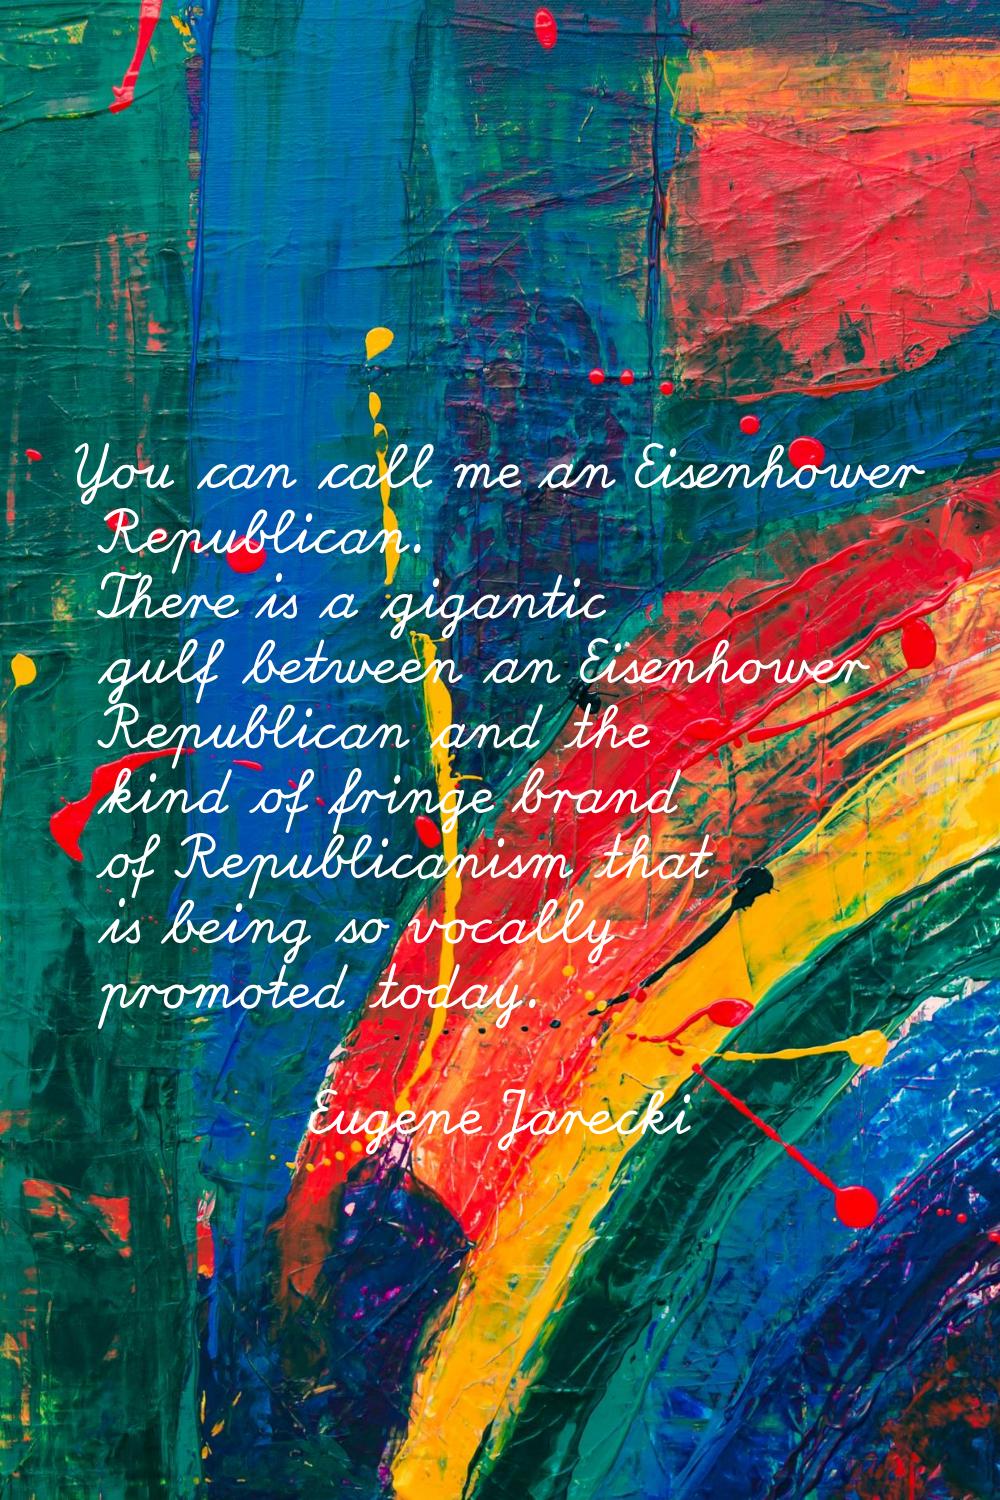 You can call me an Eisenhower Republican. There is a gigantic gulf between an Eisenhower Republican